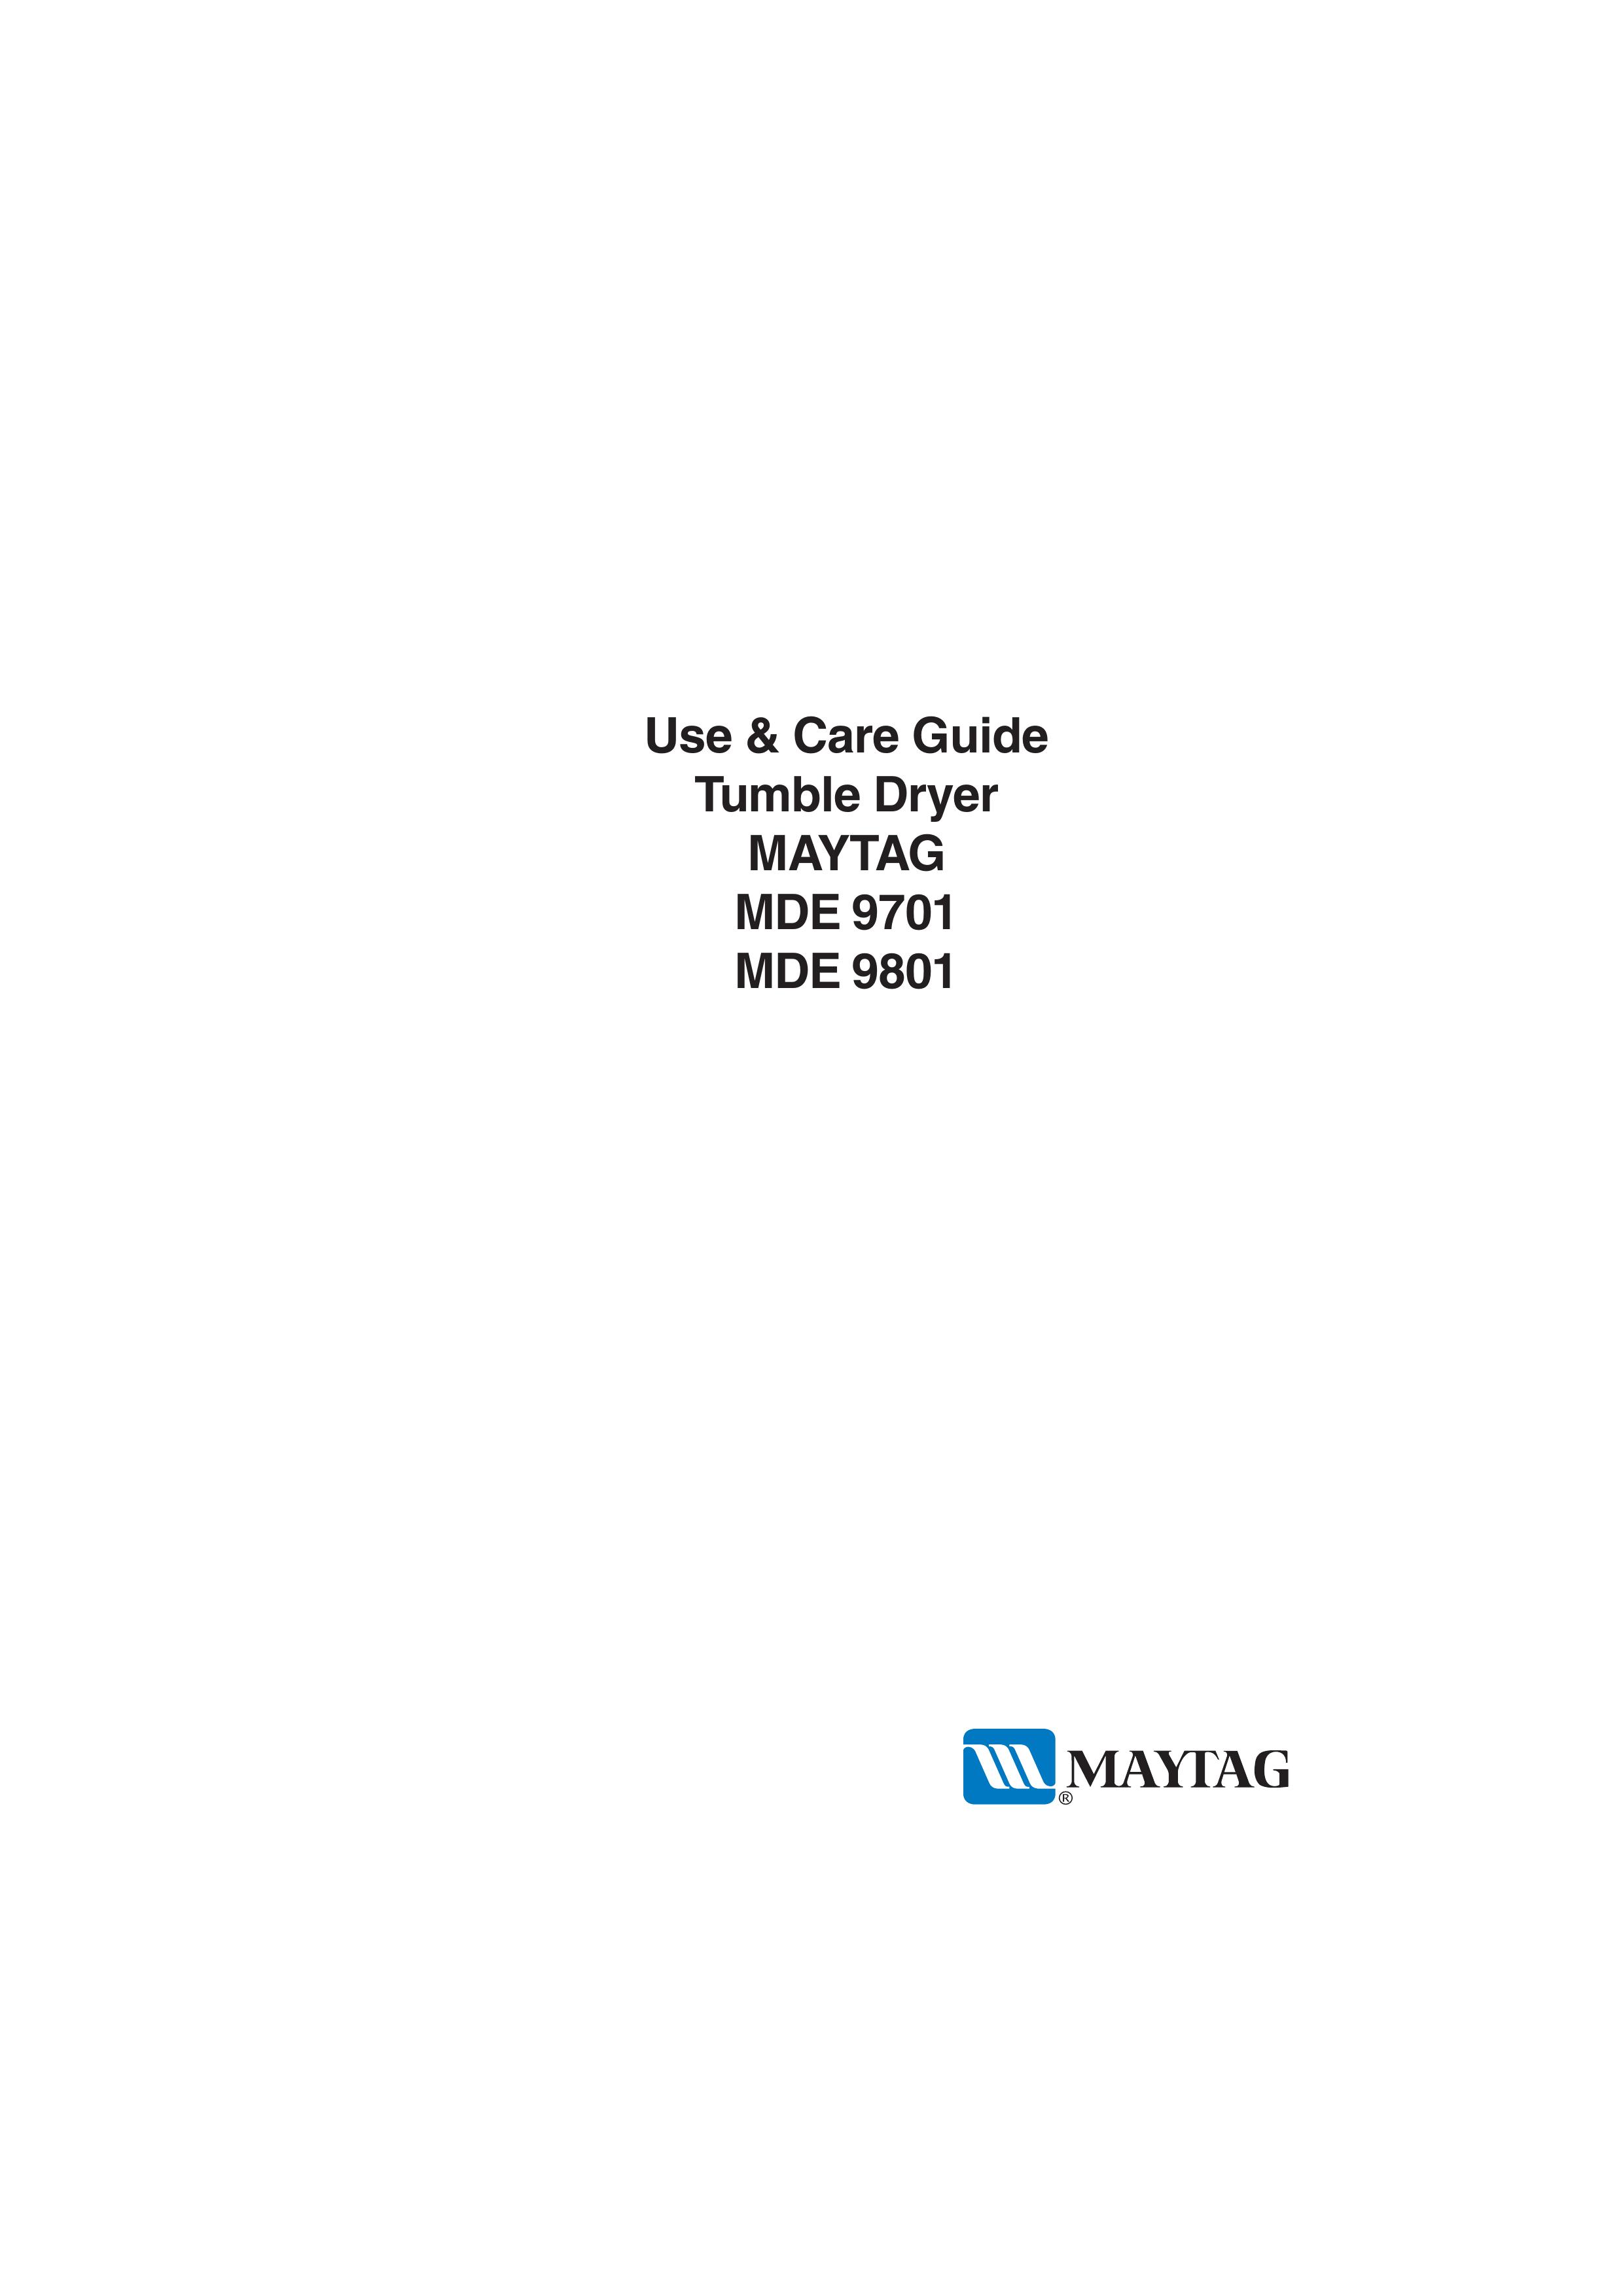 Maytag MDE 9701 Clothes Dryer User Manual